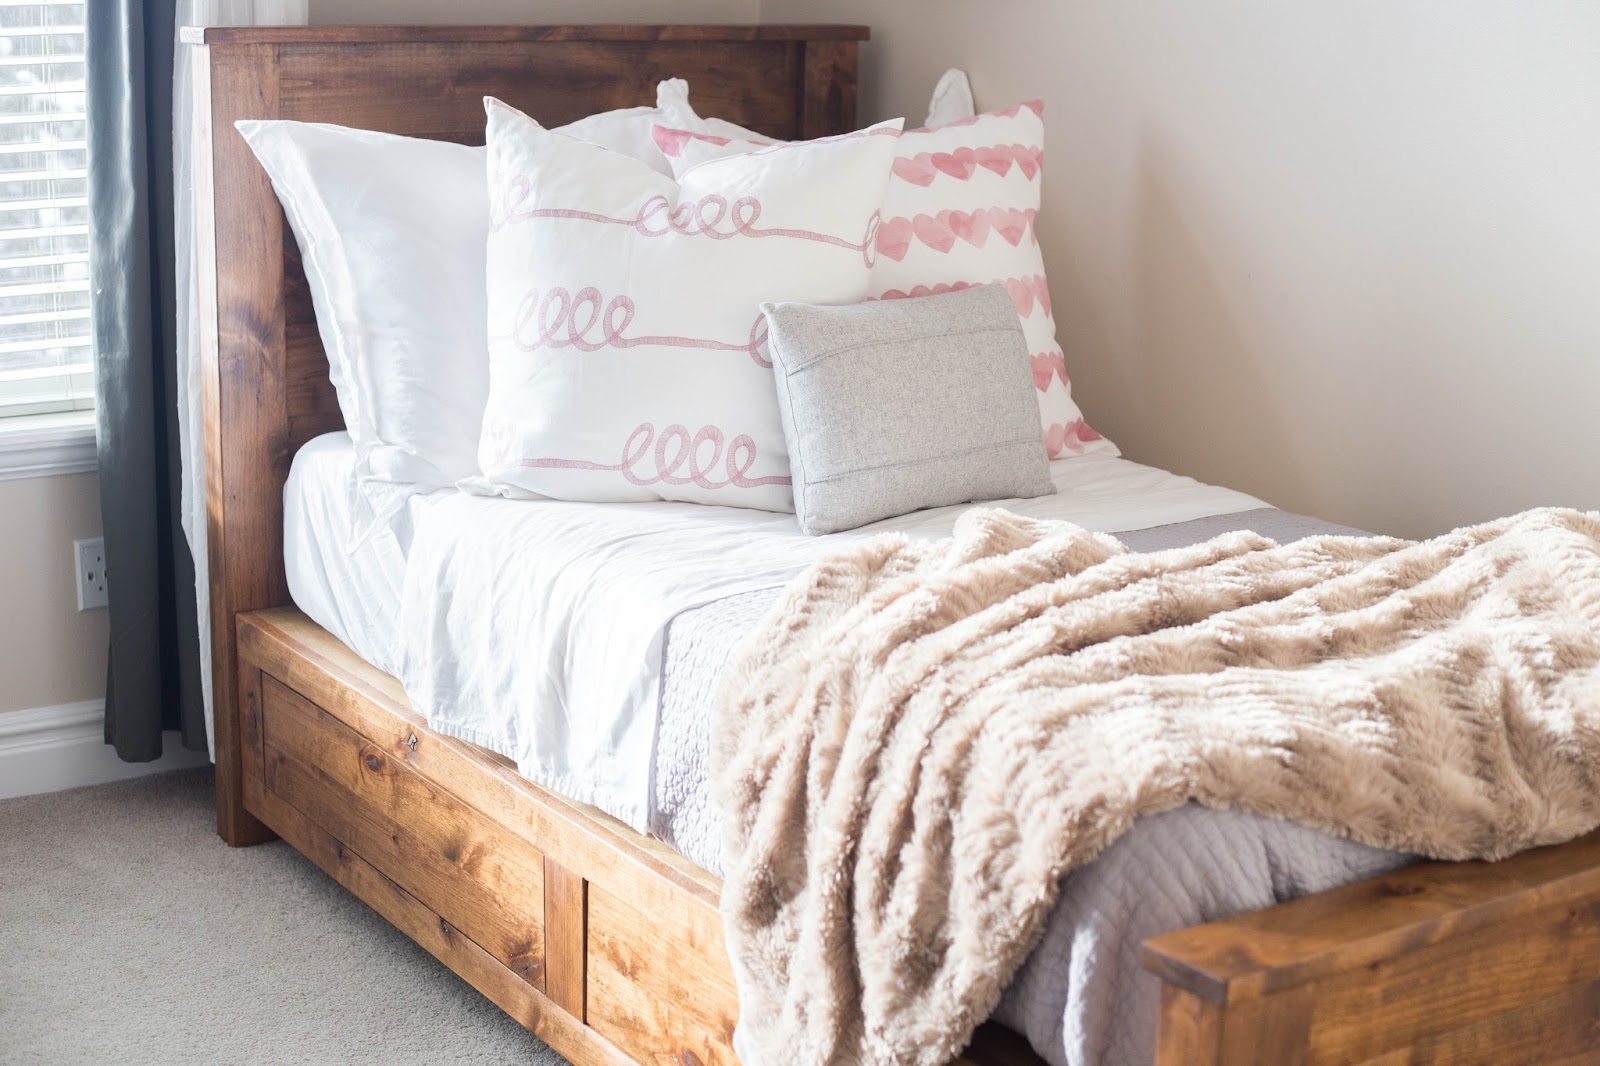 How To Build A Twin Bed Frame With Storage